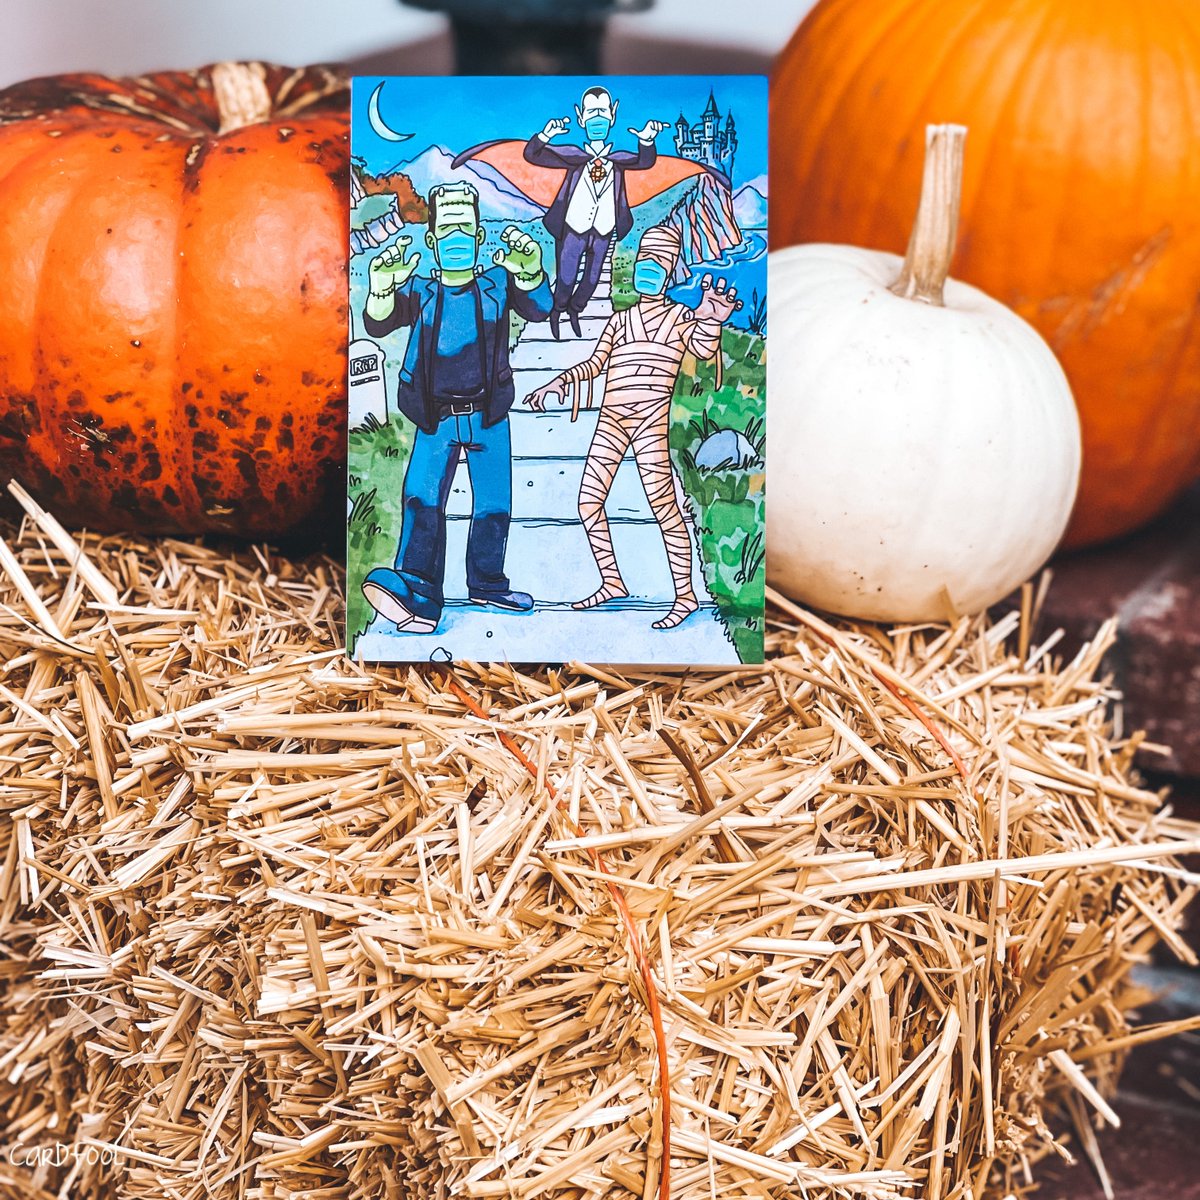 The biggest #monstermash is on it's way and it's not too late to order #happyhalloween cards! 

bit.ly/BqD1ve

#unique #art #design #happyhalloweencards #halloweencards #printed #ecards #pumpkin #pumpkinspice #funnycards #originalcards #funnyecards #humorcards